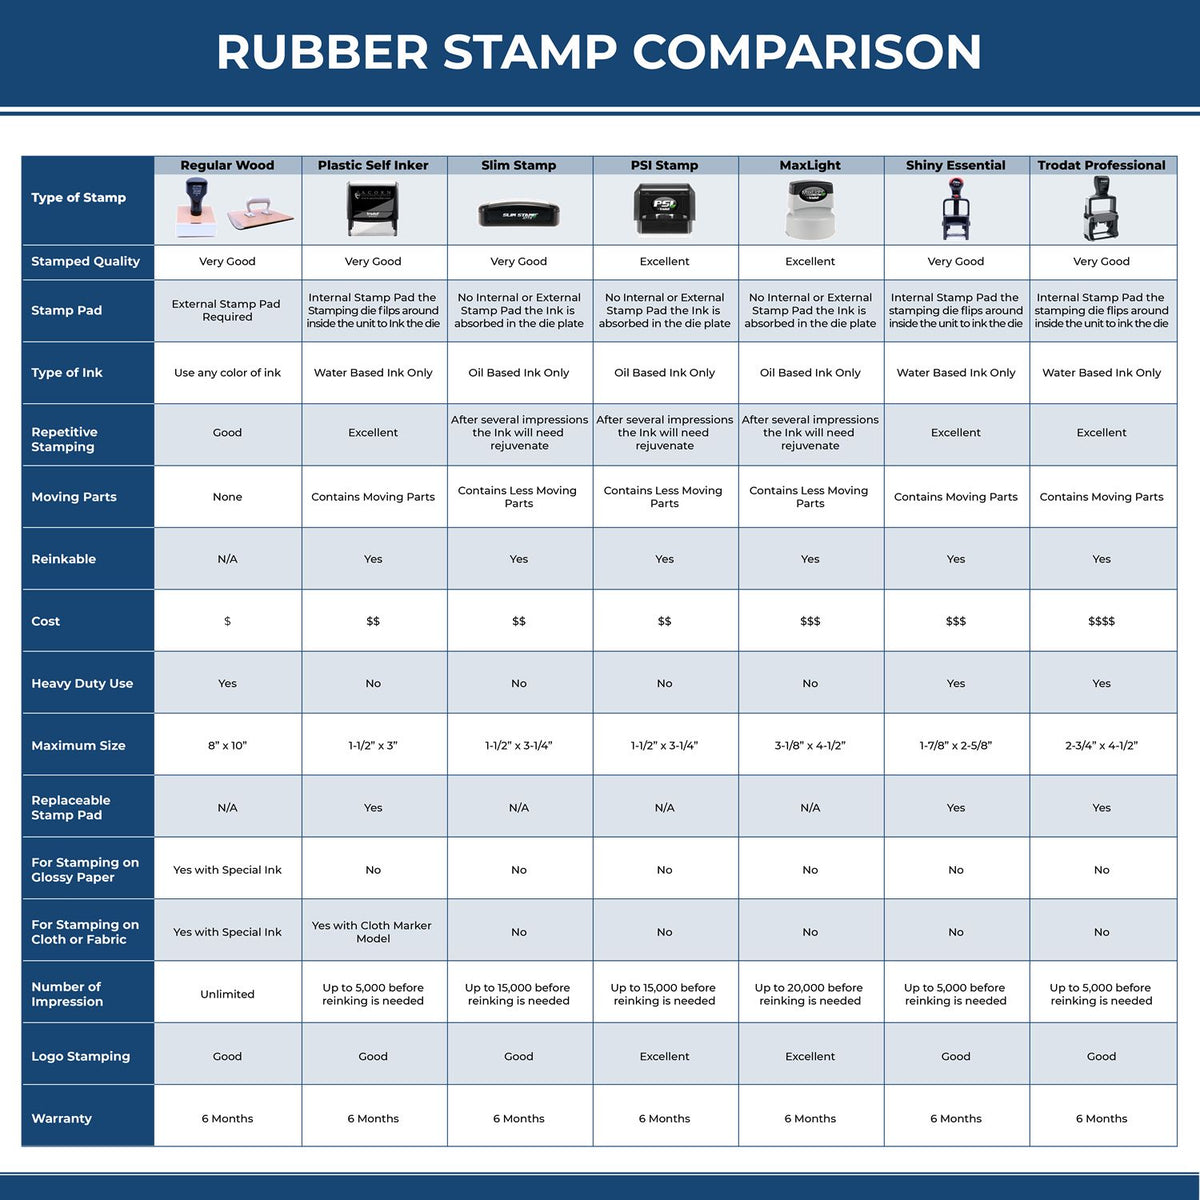 A comparison chart for the different types of mount models available for the Heavy-Duty Texas Rectangular Notary Stamp.